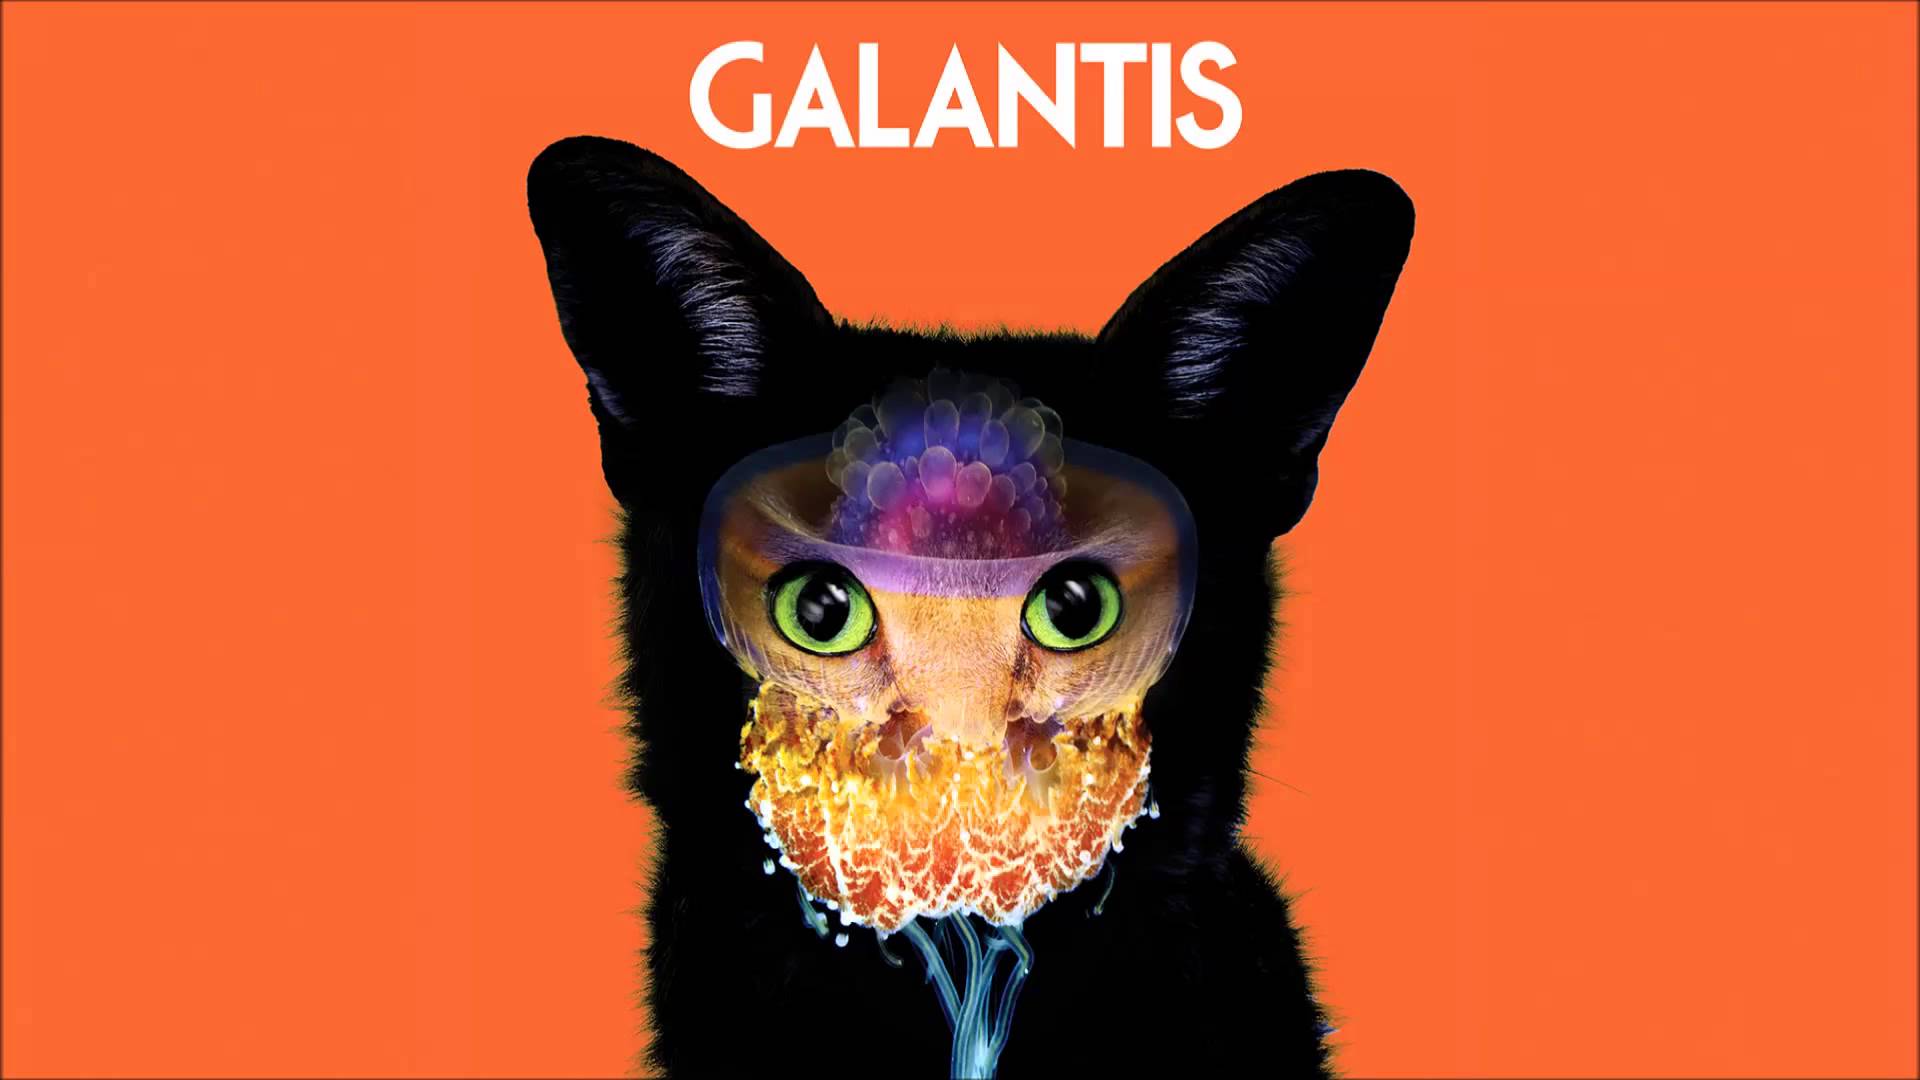 Galantis Releases New Track Peanut Butter Jelly From Upcoming